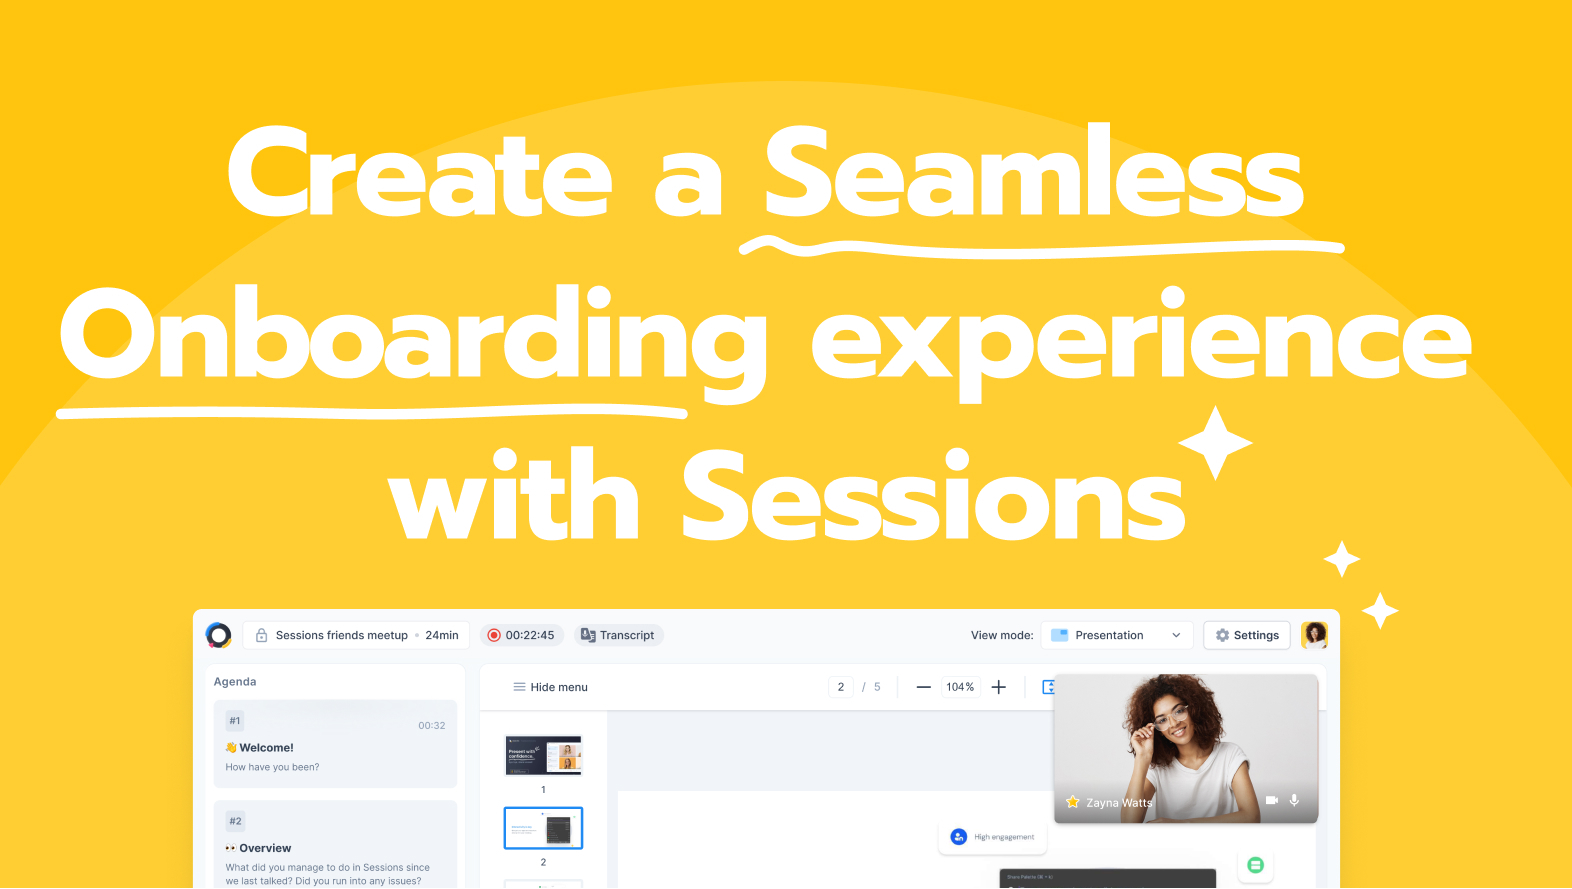 create a seamless onboarding experience with Sessions